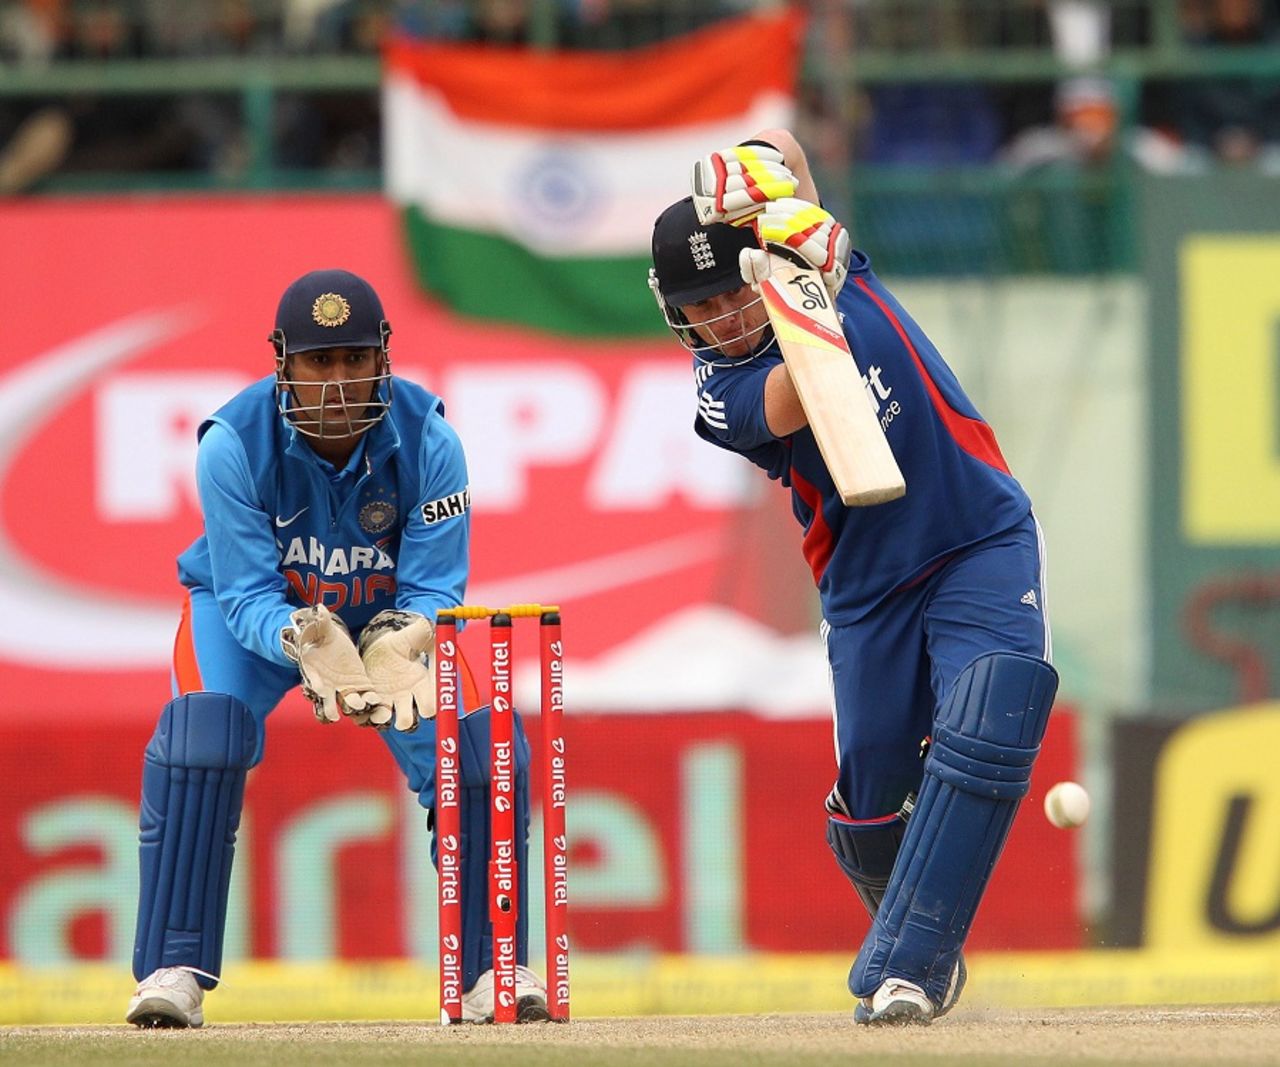 Ian Bell drives one down the ground, India v England, 5th ODI, Dharamsala, January 27, 2013